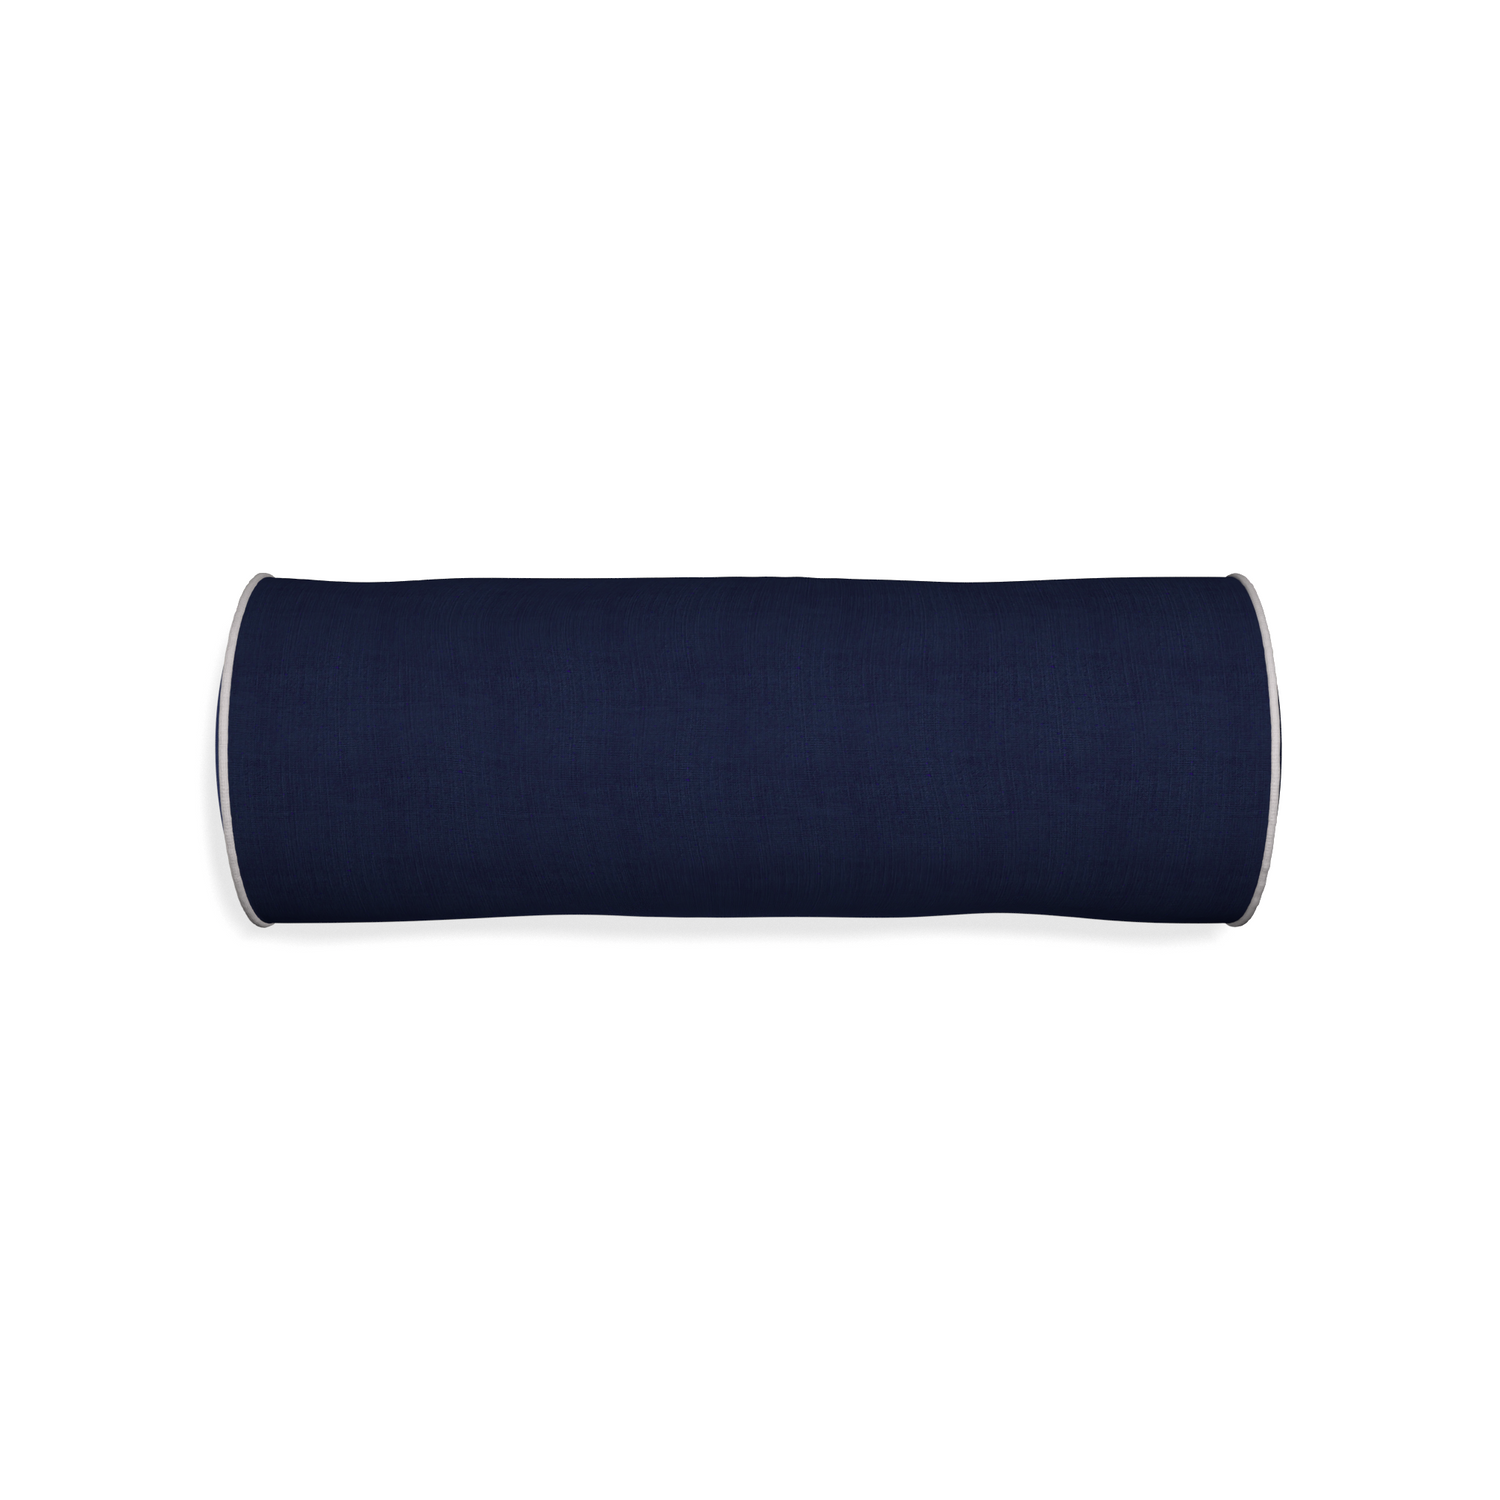 Bolster midnight custom navy bluepillow with pebble piping on white background